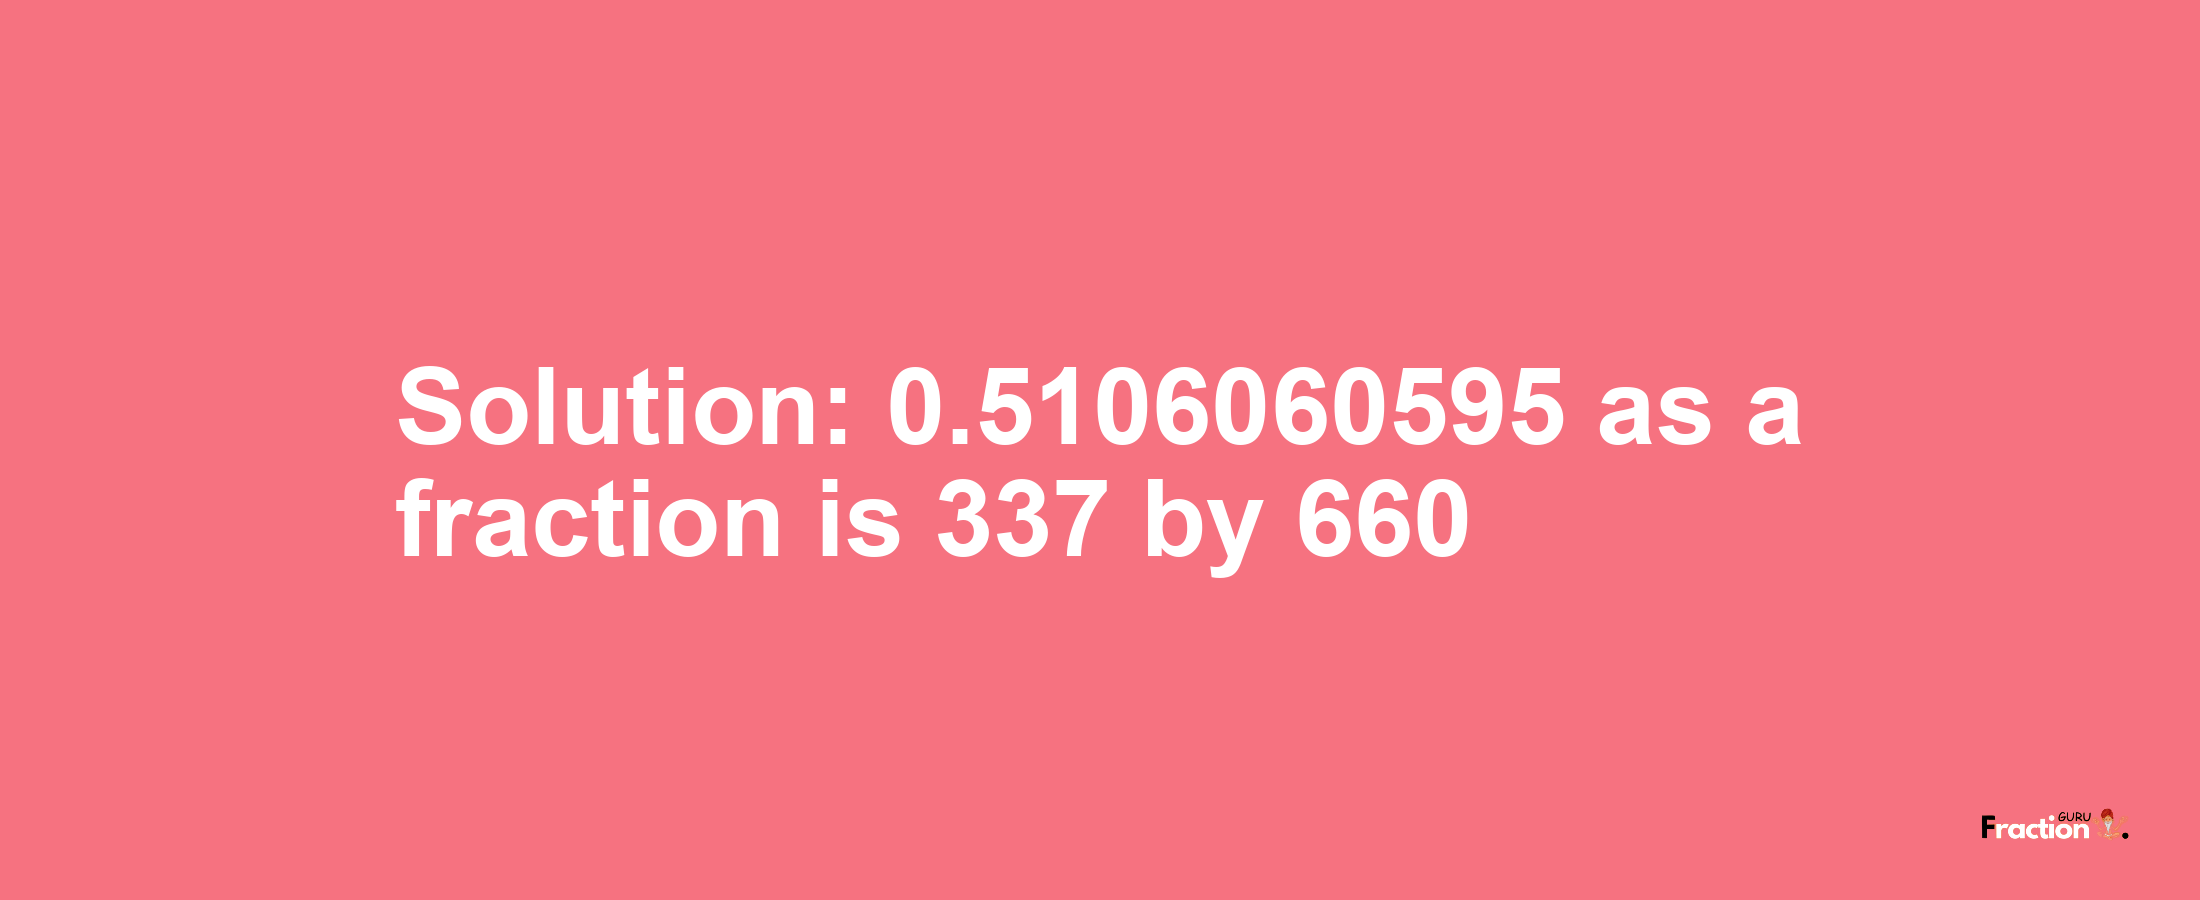 Solution:0.5106060595 as a fraction is 337/660